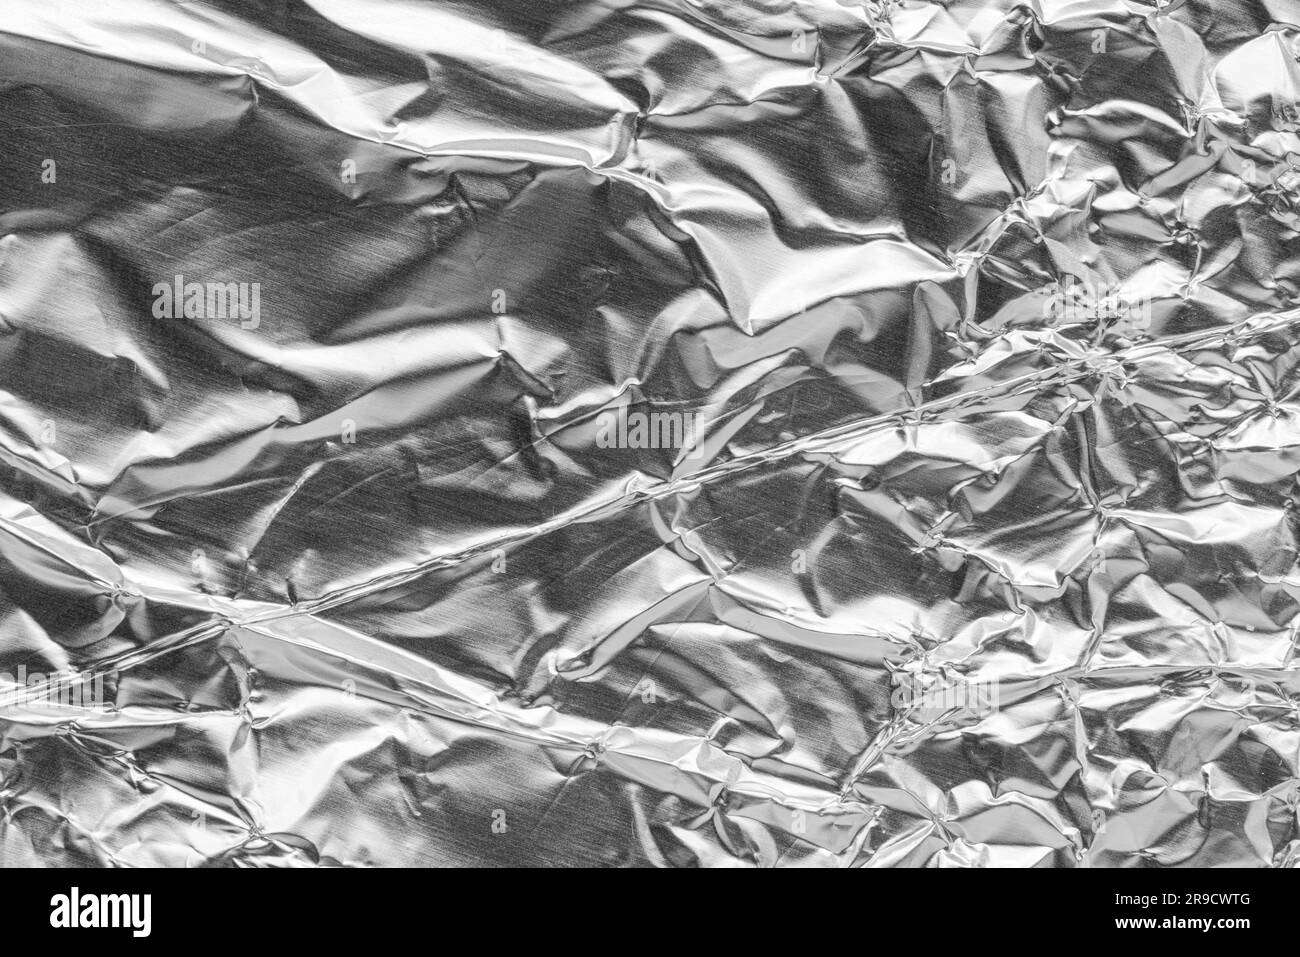 https://c8.alamy.com/comp/2R9CWTG/crumpled-bright-shiny-metallic-silver-aluminium-foil-background-flat-lay-view-backdrop-with-copy-space-for-text-2R9CWTG.jpg